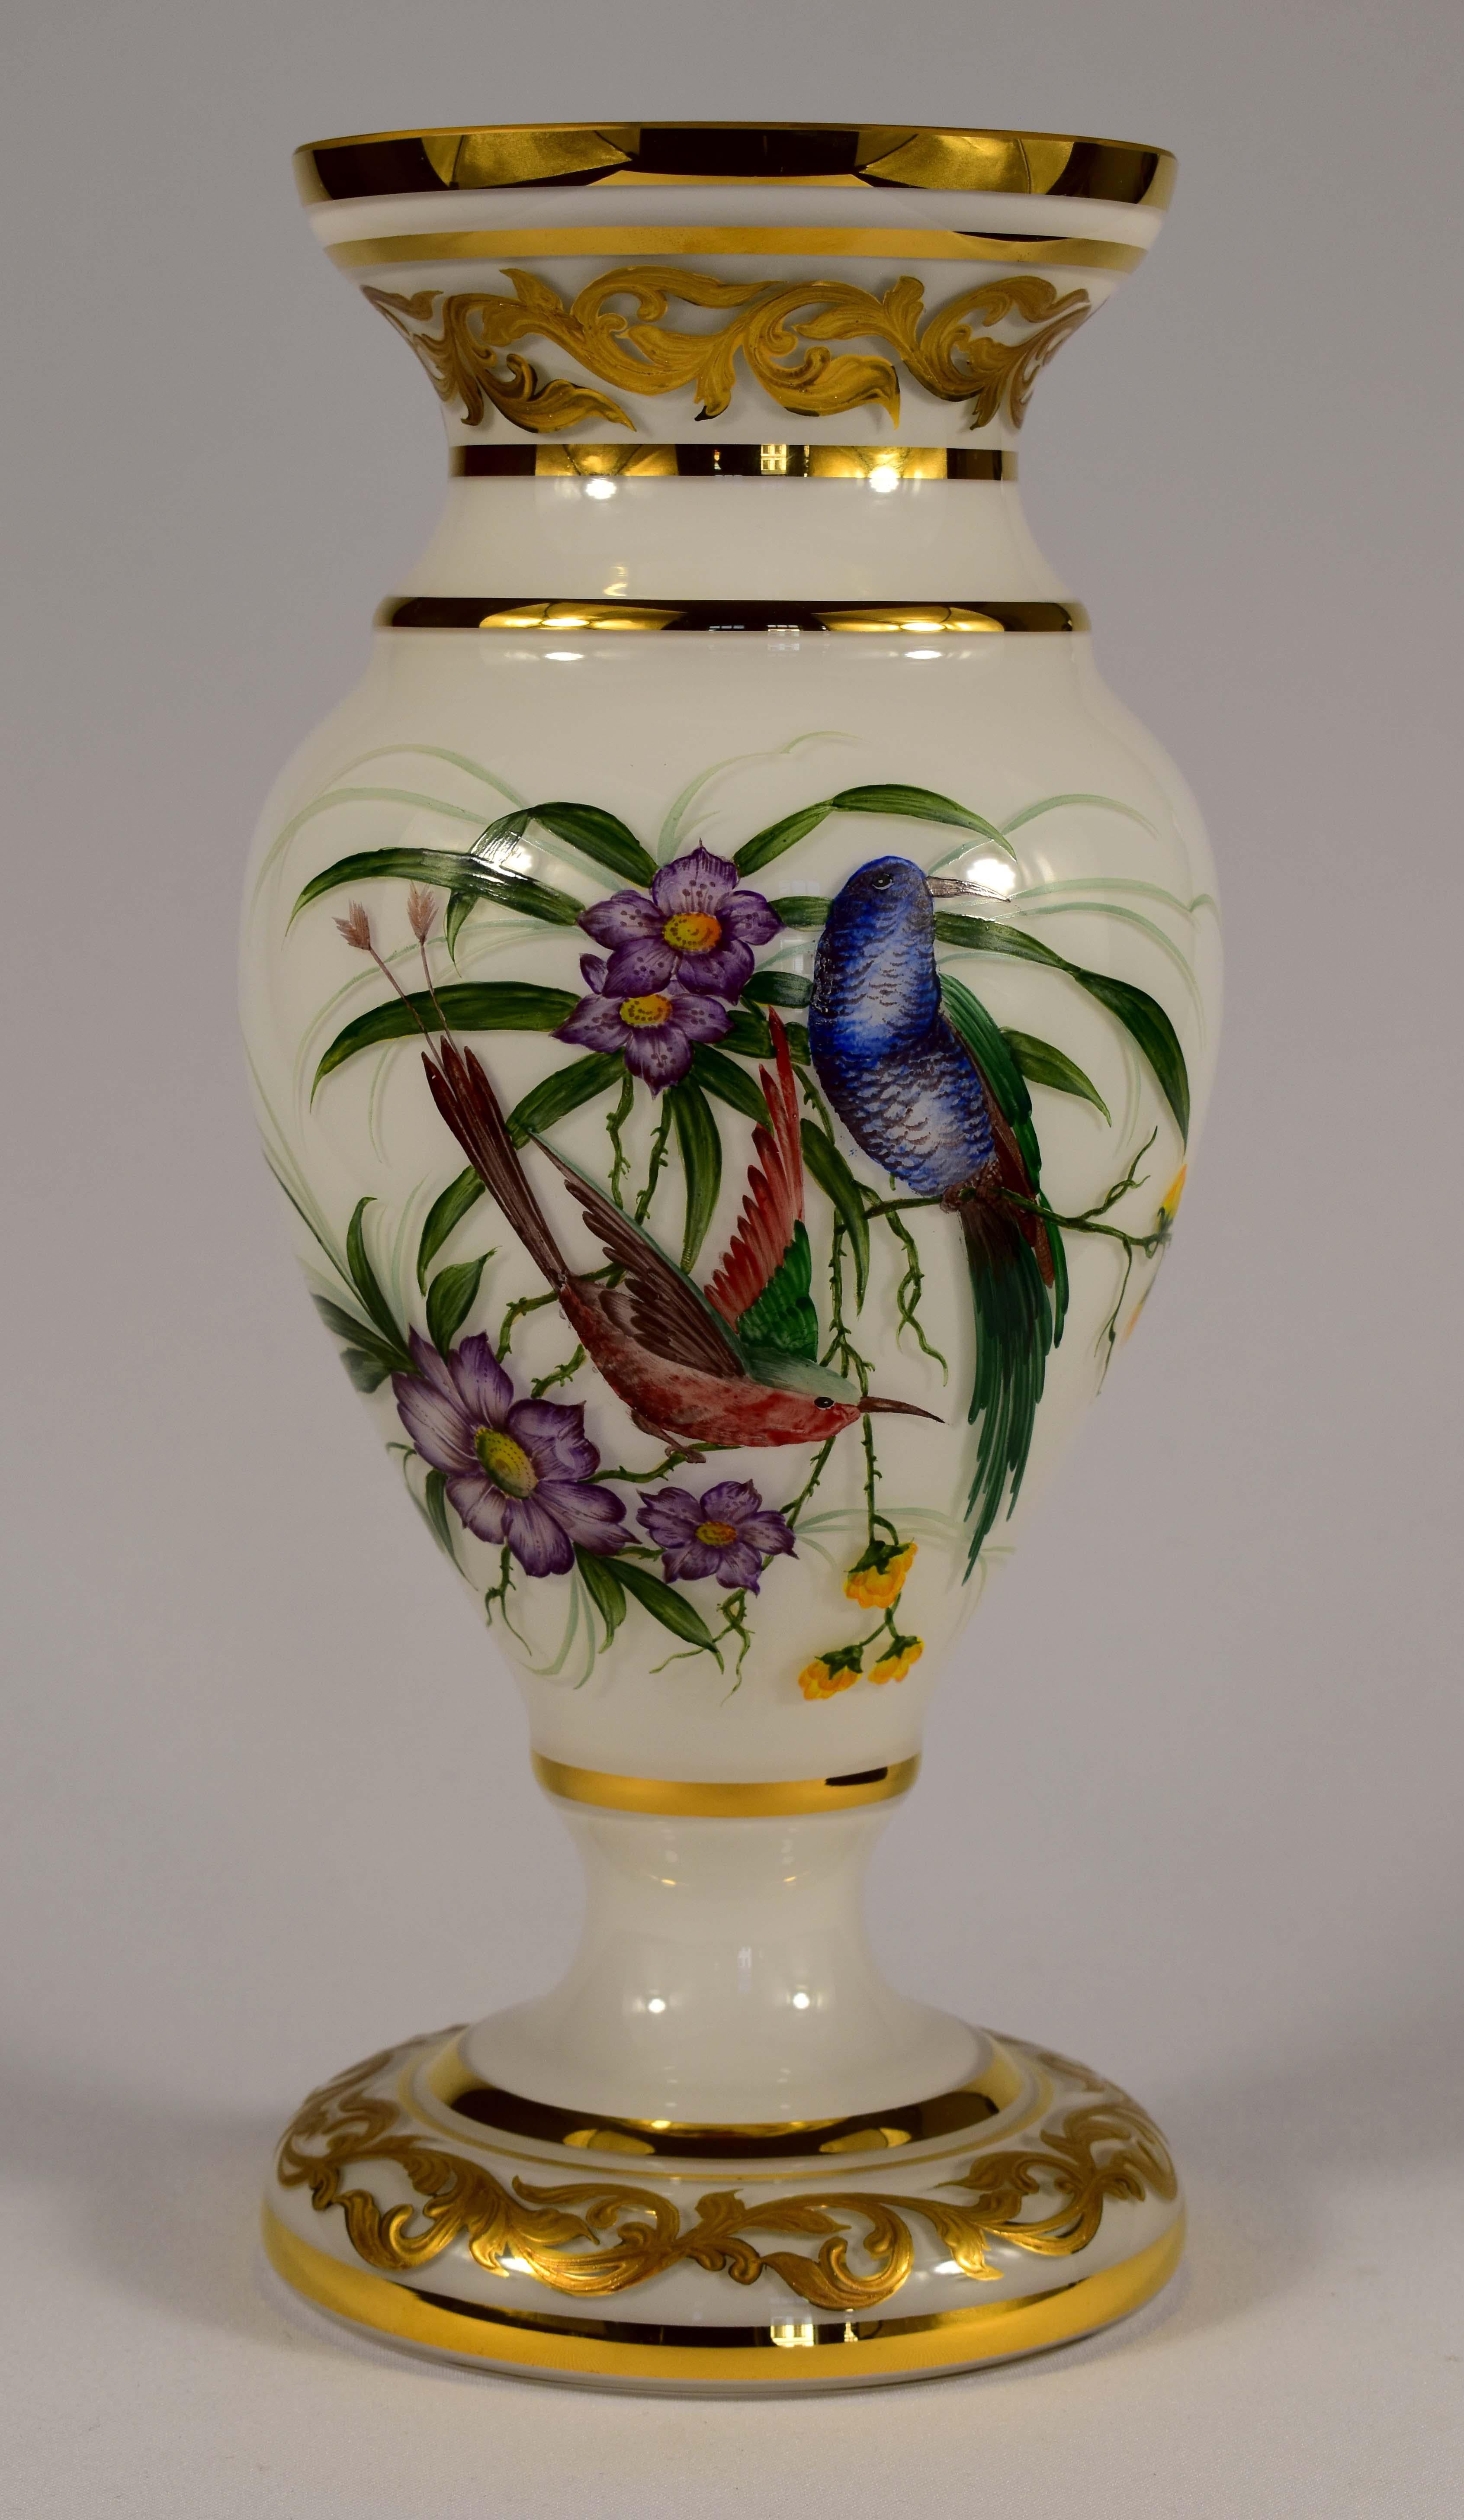 Hand painted opal glass vase with exoic bird and flower motif. It is 100% handmade using old techniques. It is Bohemian glass and Bohemian glassmakers were known for their quality. The vase is in good condition and is not damaged in any way.